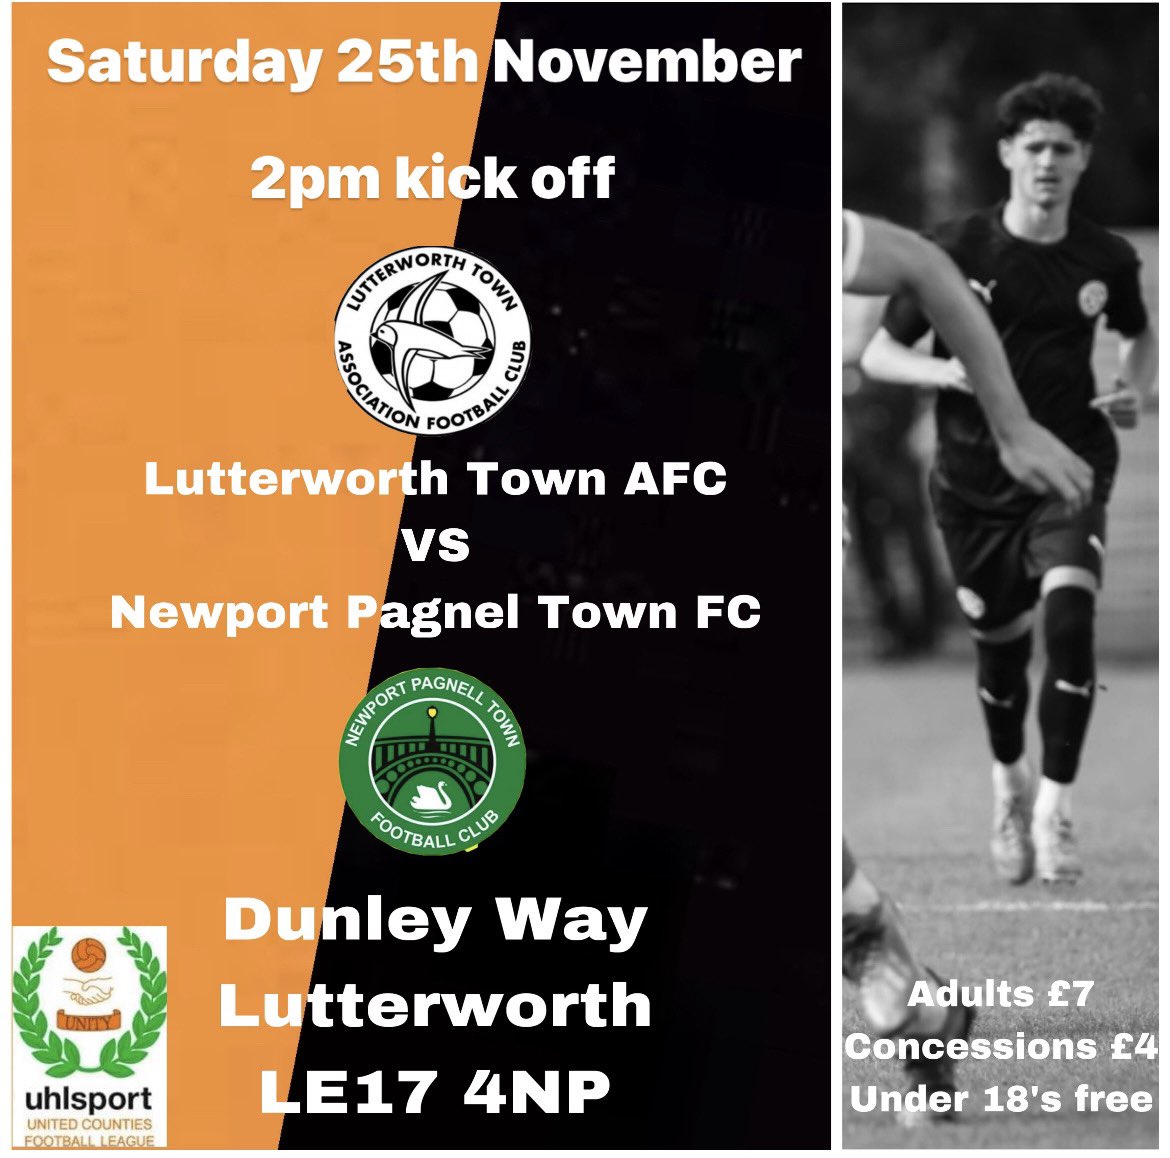 Next up for the lads⚽️ #uptheswifts 🧡🖤